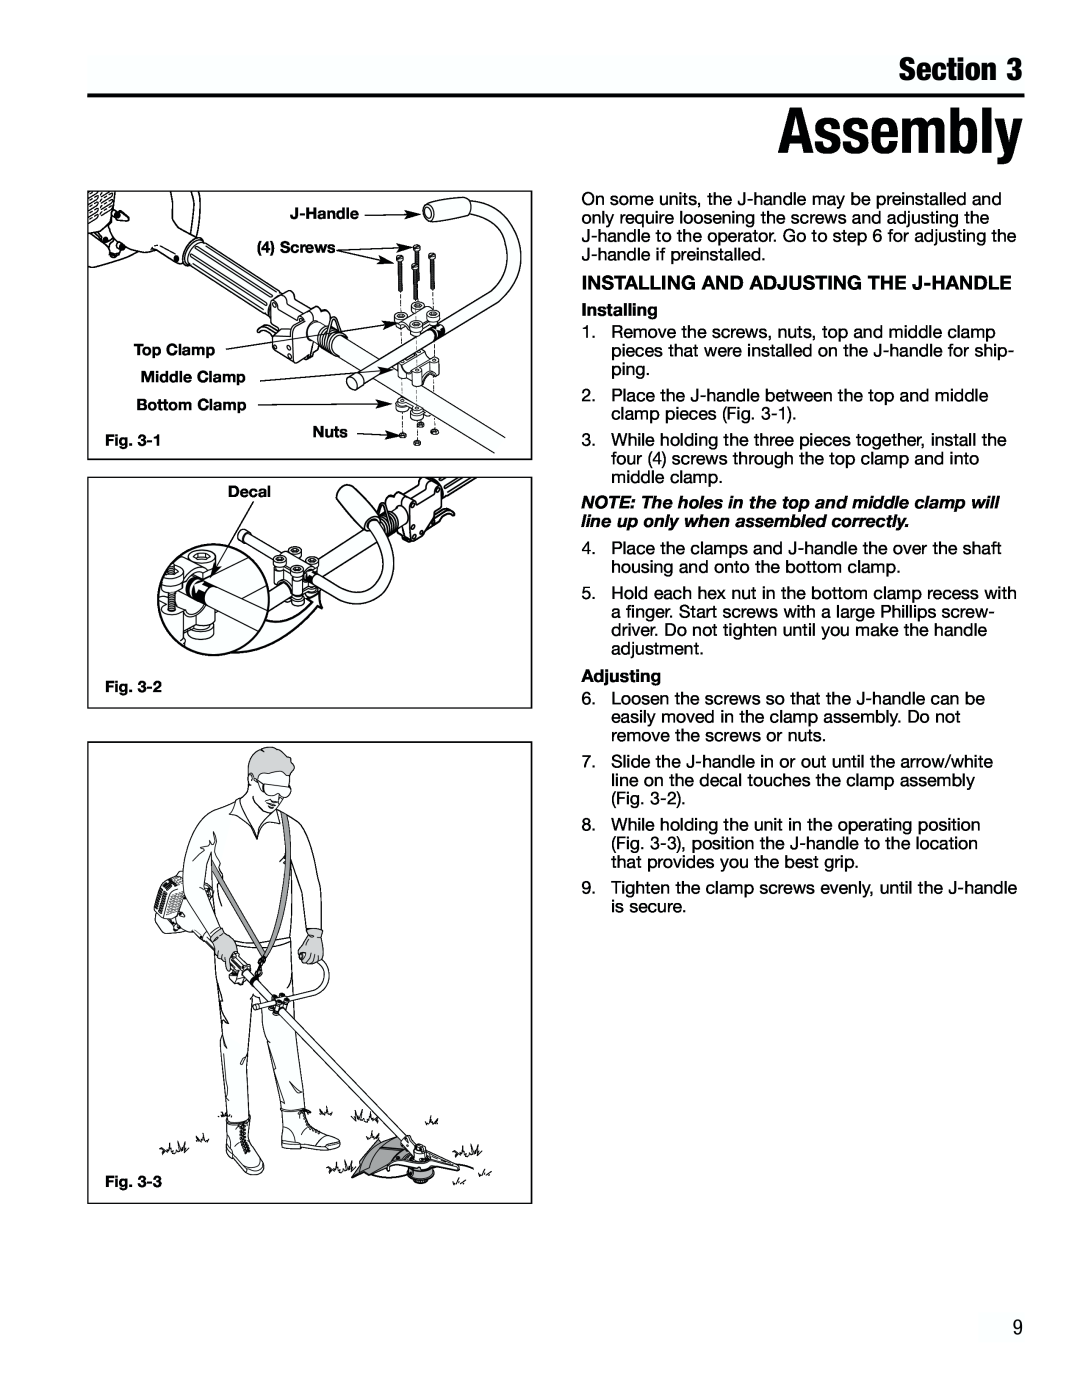 Troy-Bilt TB4000 manual Assembly, Installing And Adjusting The J-Handle, Section 